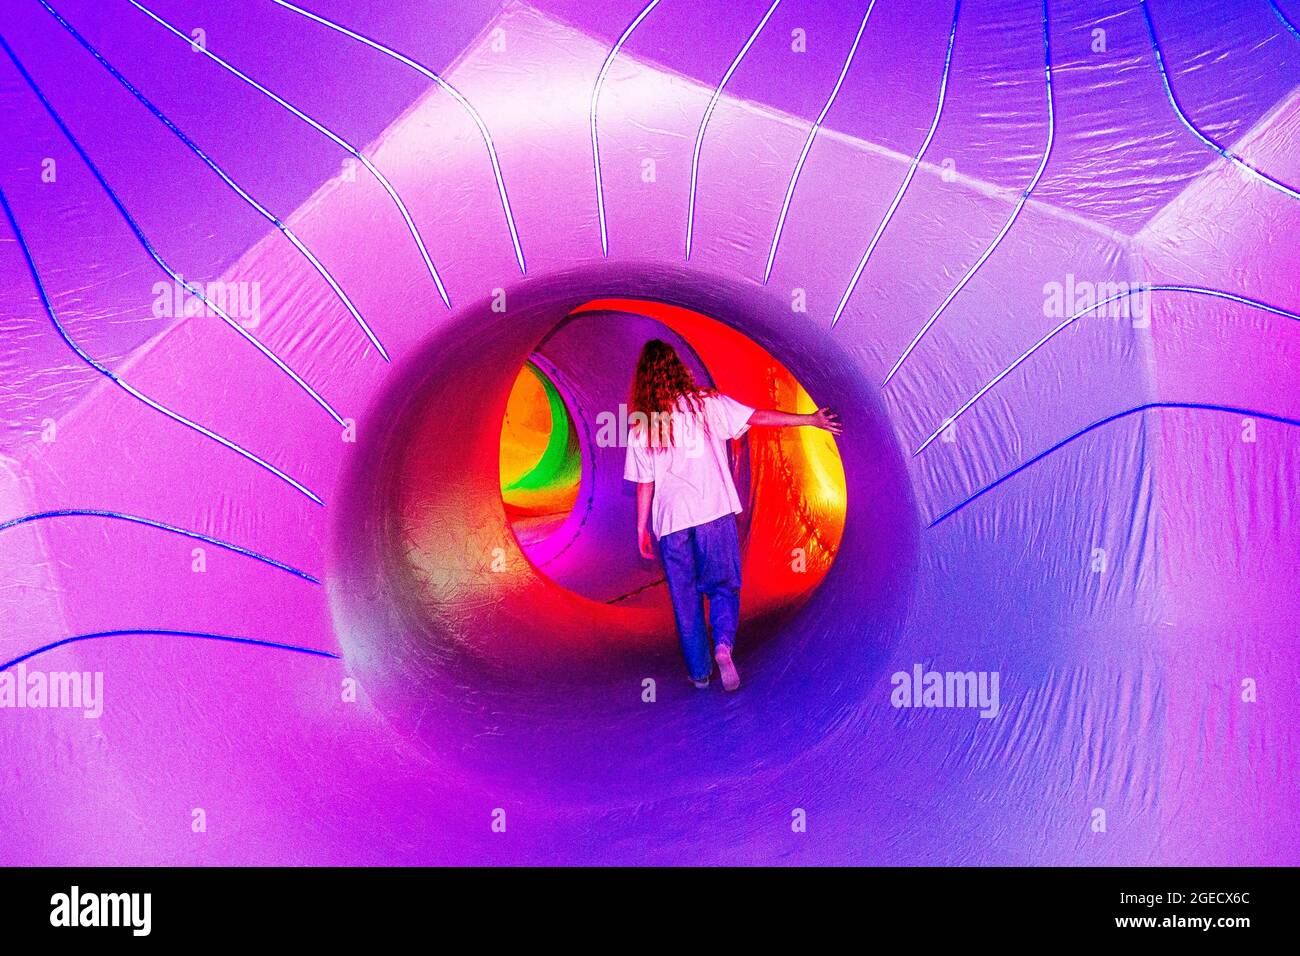 Dodecalis - Architects of Air in Blackburn, Lancashire, UK.  Aug 2021.  Zoe Felix explores the changing patterns of light, shifting as they pass through labyrinthine passages, Dodecalis Luminarium provides moments of pause in meditative stillness and quiet wonder in the furthest corners of the precision-engineered, ‘hide and seek’ illuminated colour tunnels of light architecture. Stock Photo